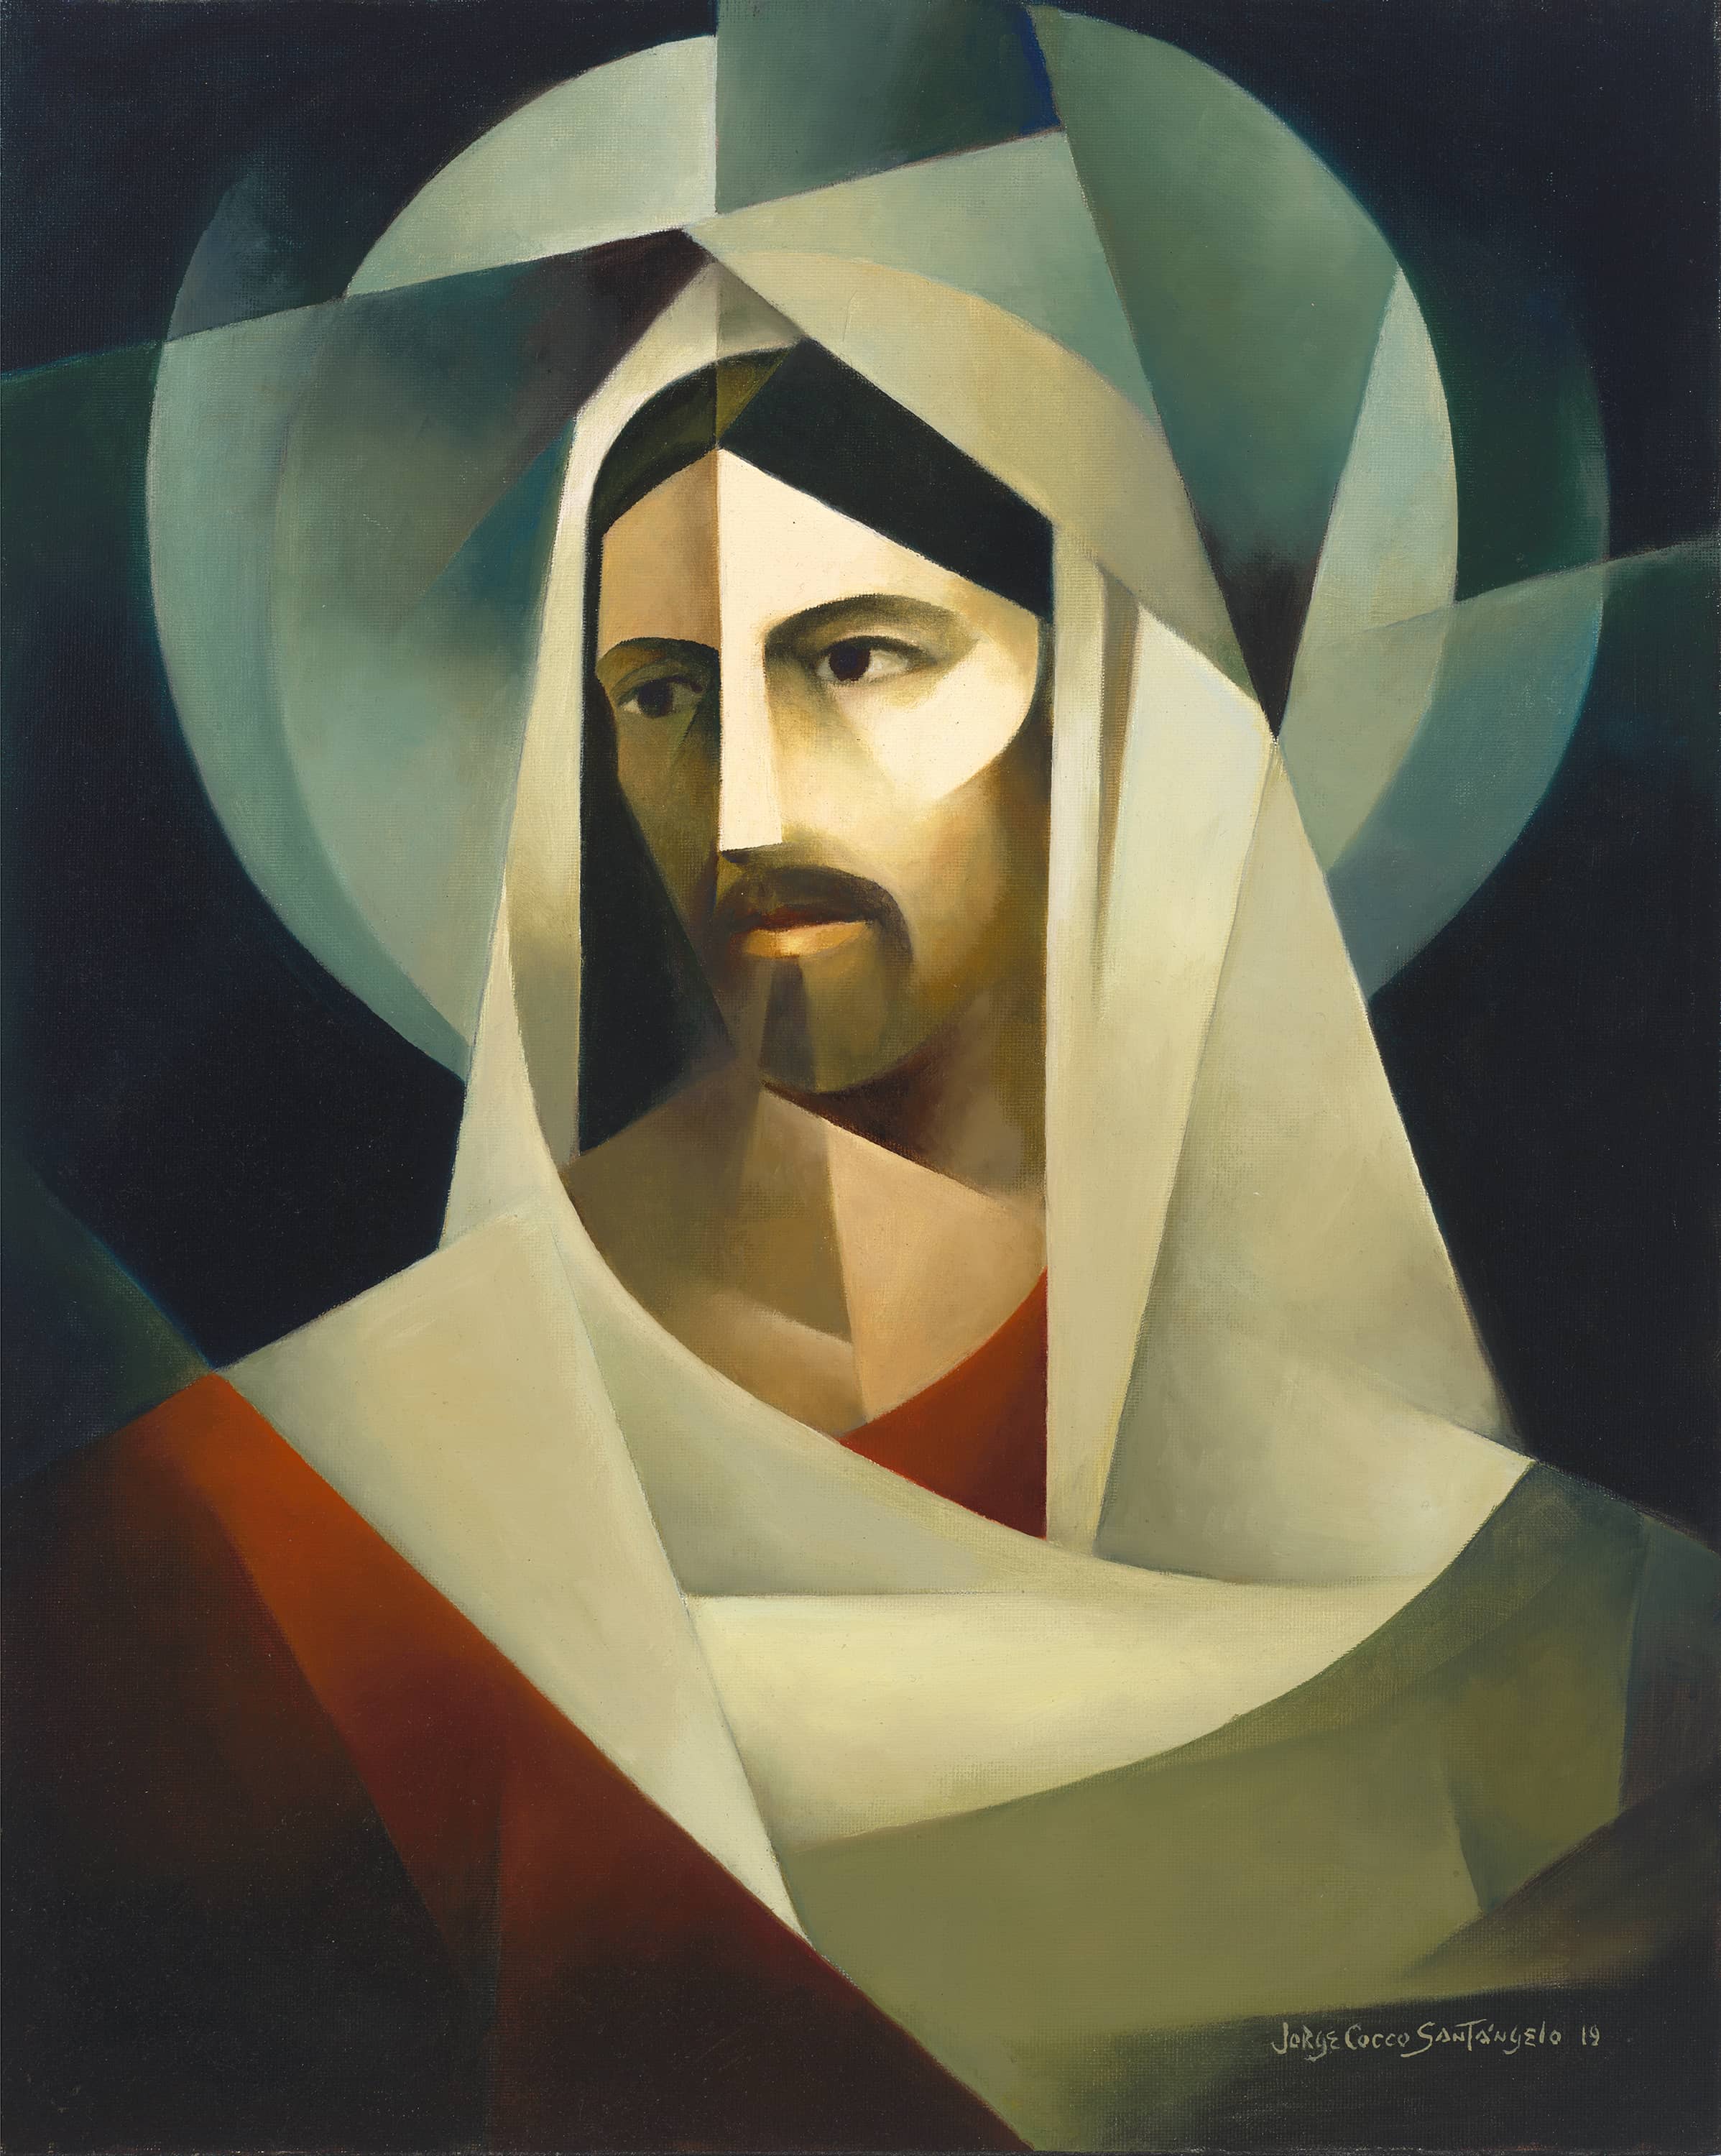 A painting of Jesus Christ done in the sacrocubism style of Jorge Cocco Santangelo.